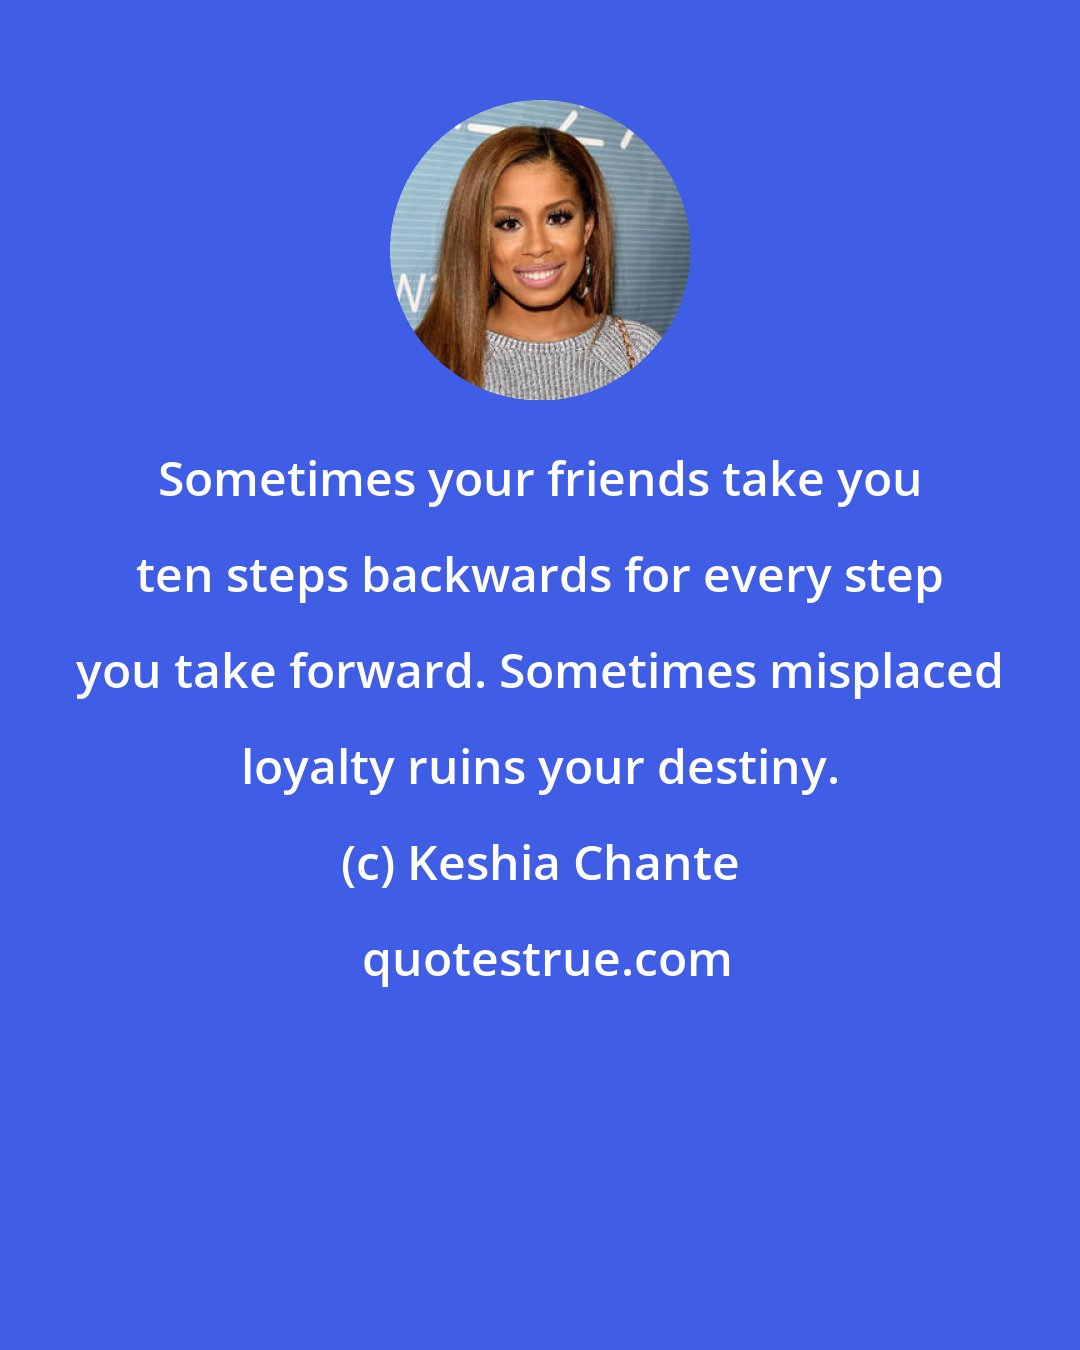 Keshia Chante: Sometimes your friends take you ten steps backwards for every step you take forward. Sometimes misplaced loyalty ruins your destiny.